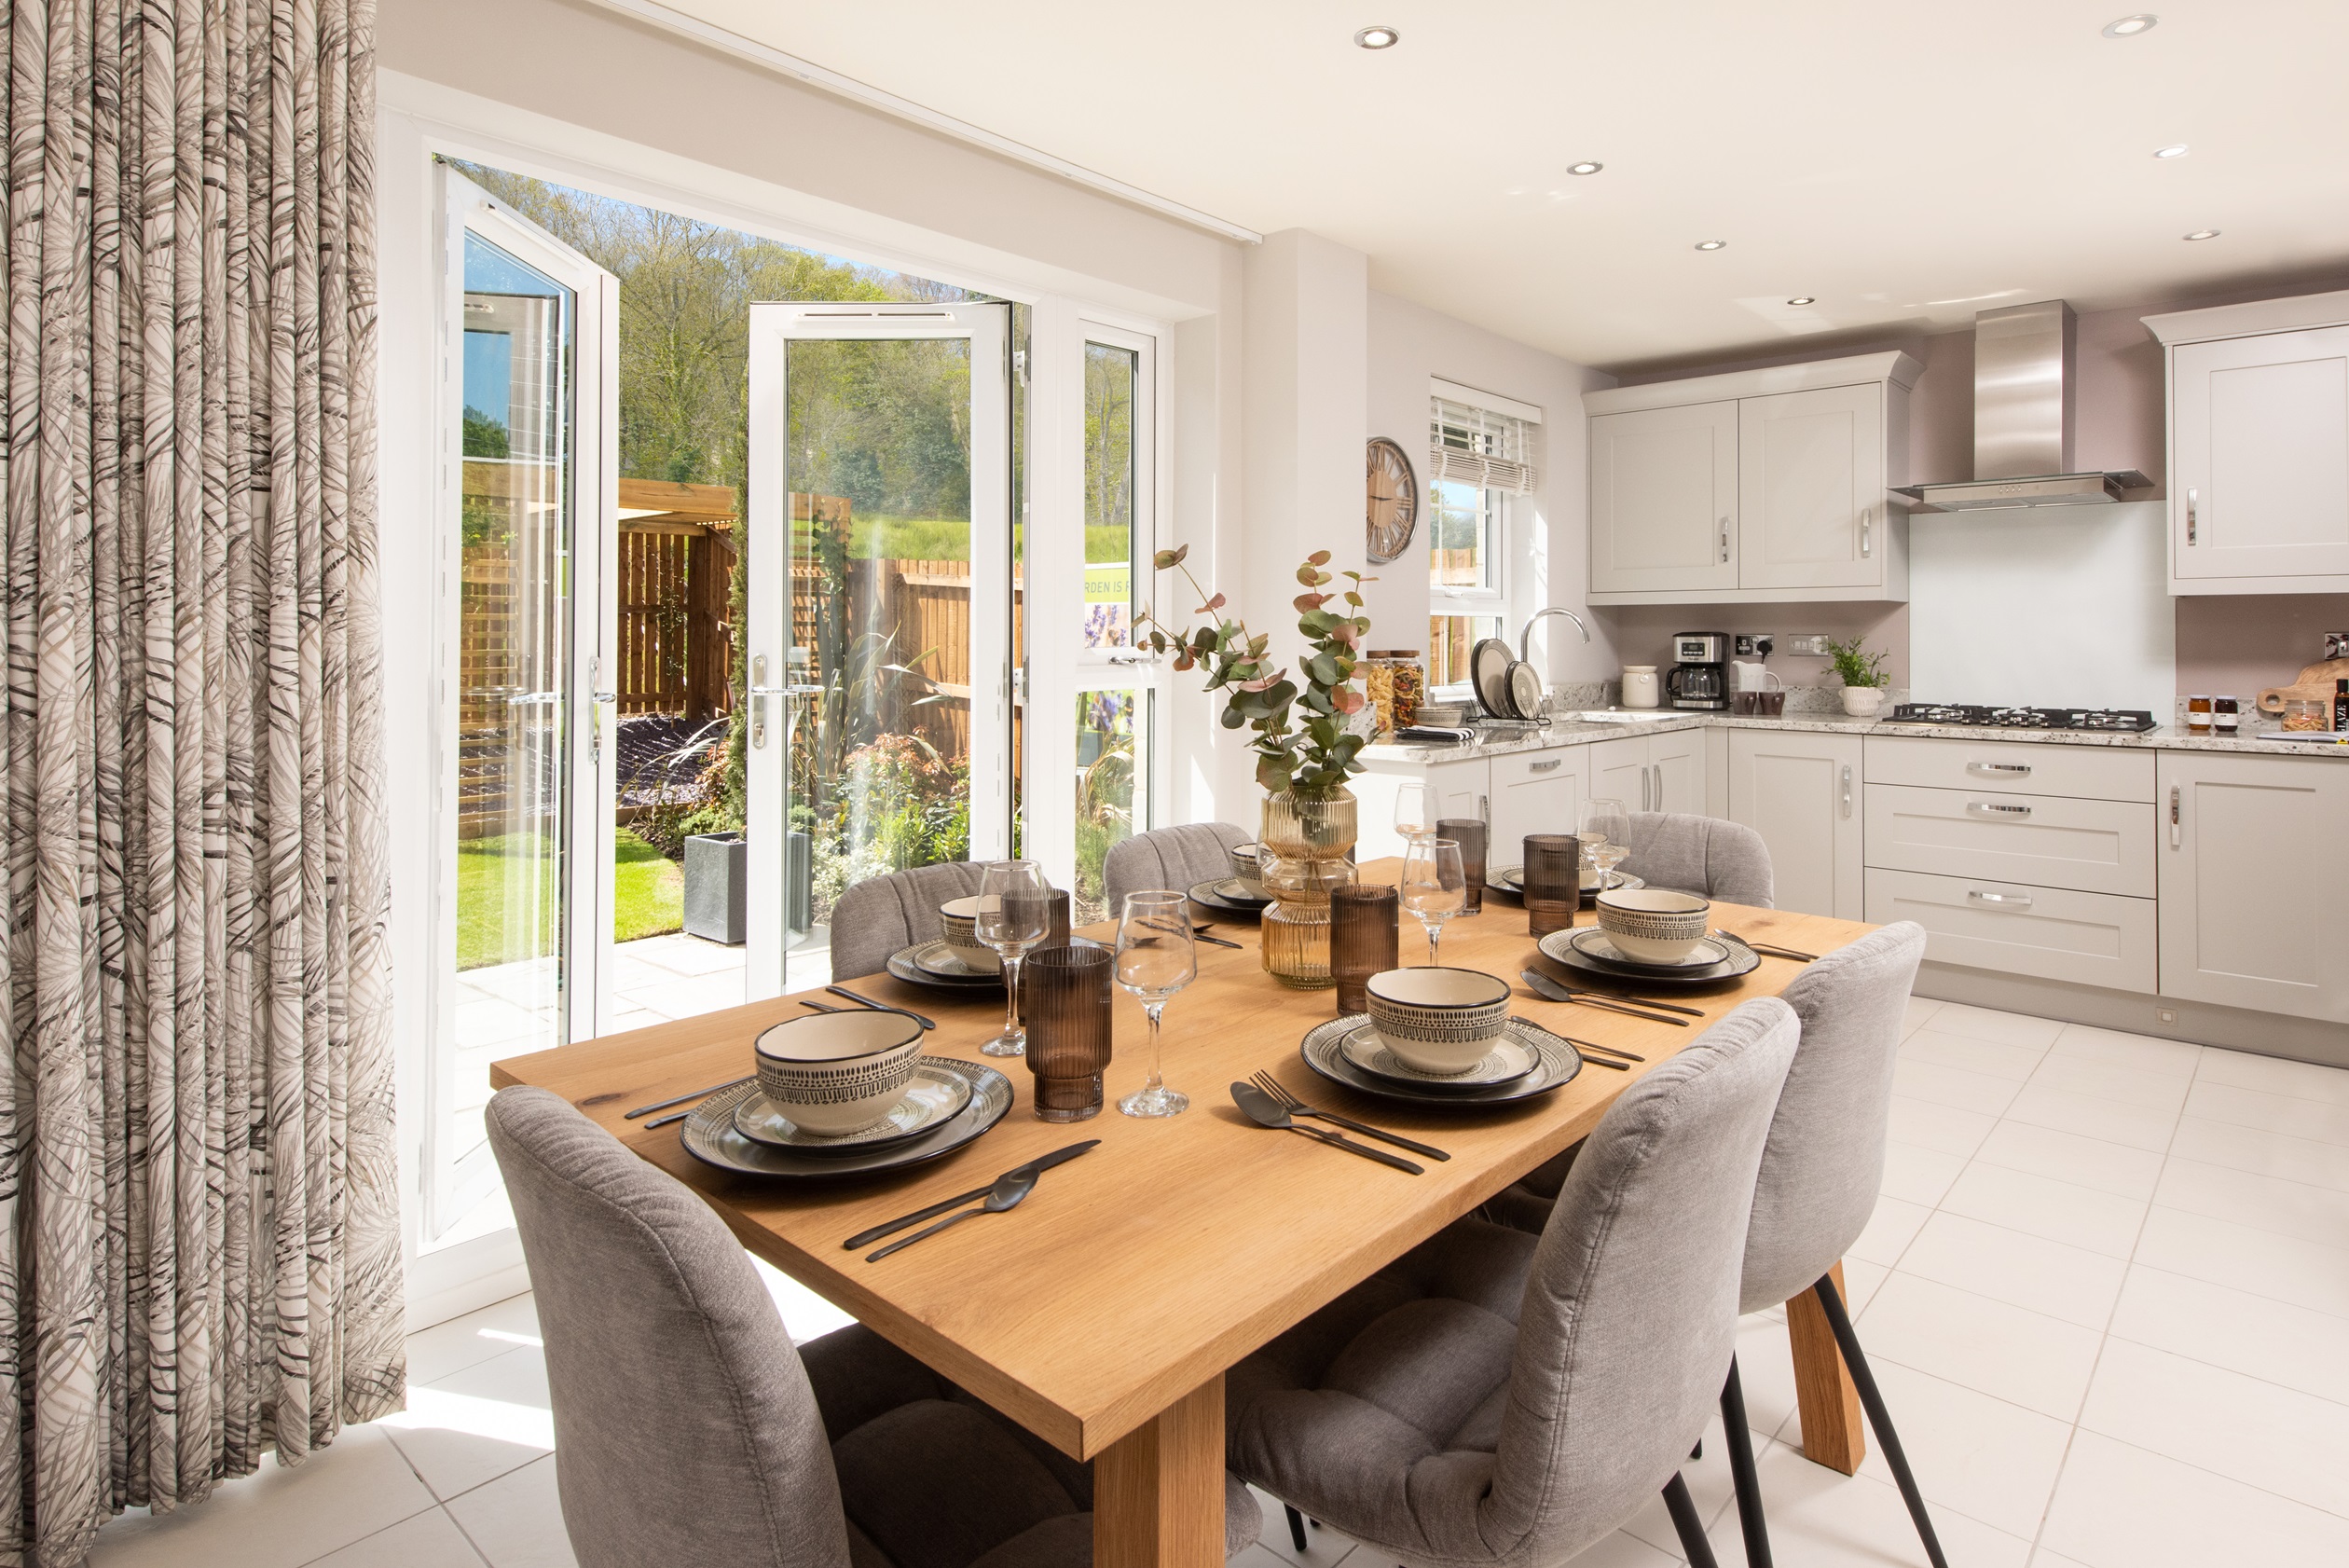 Property 3 of 9. The Mews Showhome Kitchen